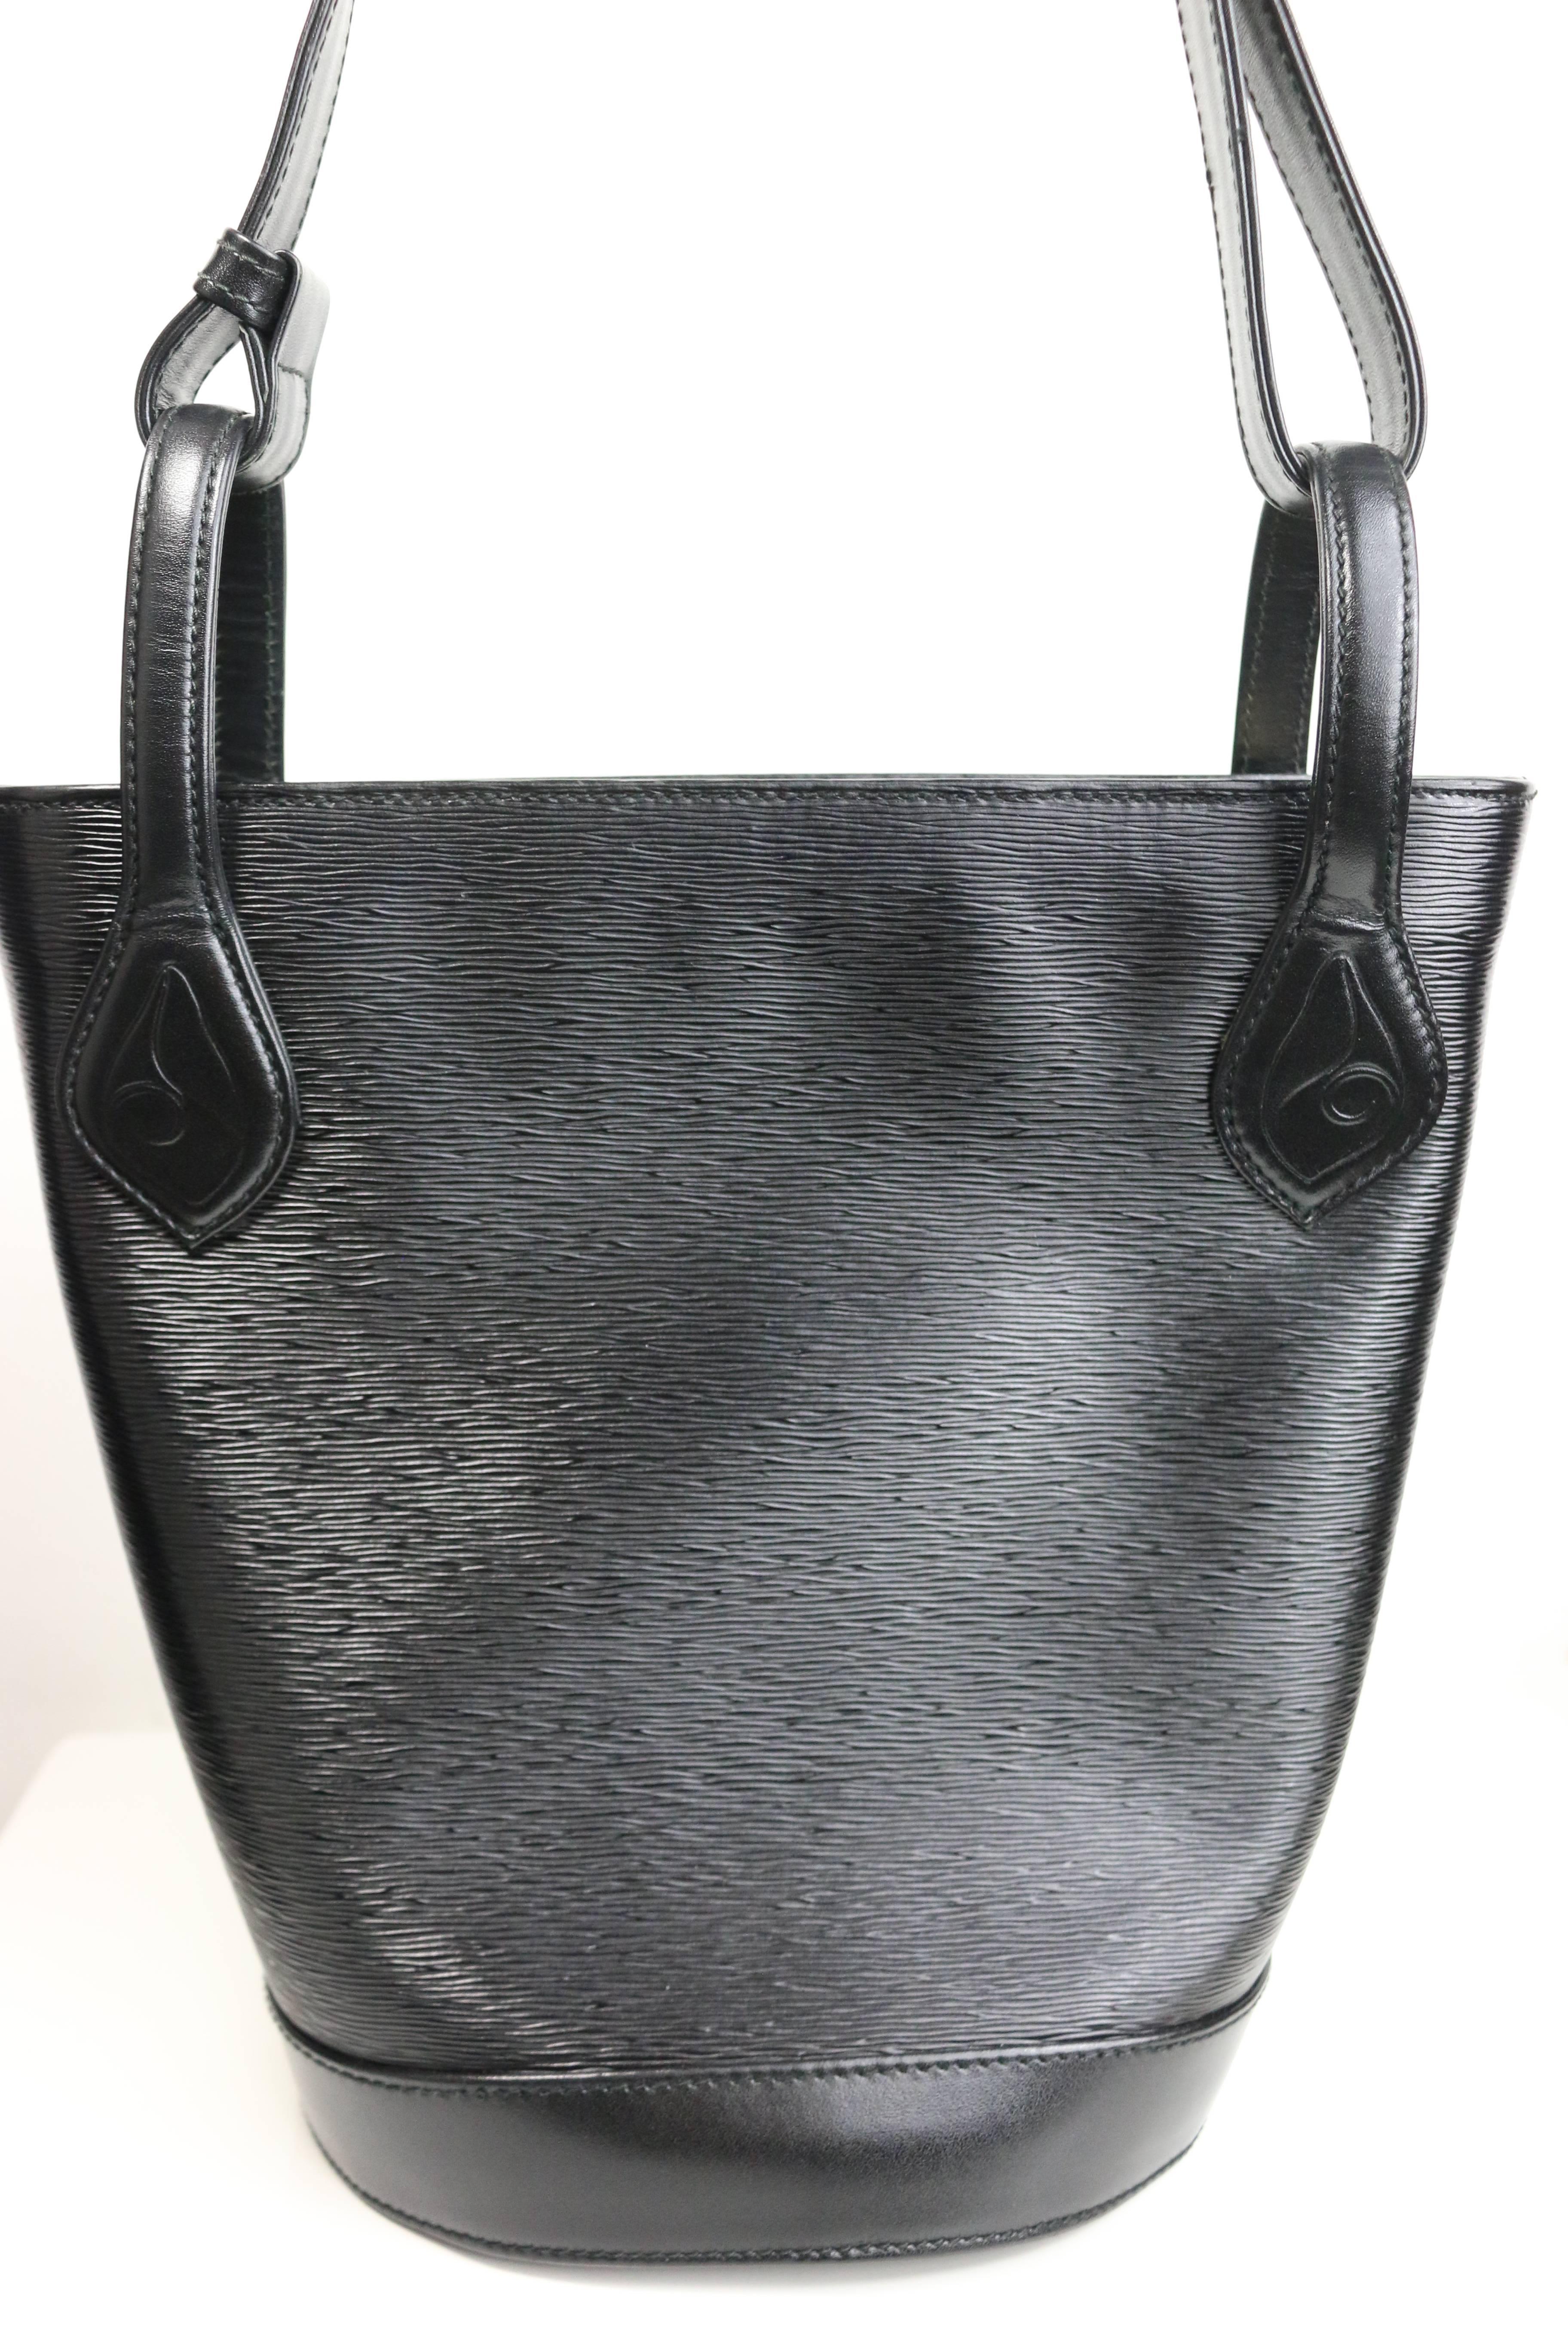 Women's Chloe Black Leather Bucket Bag with Strap